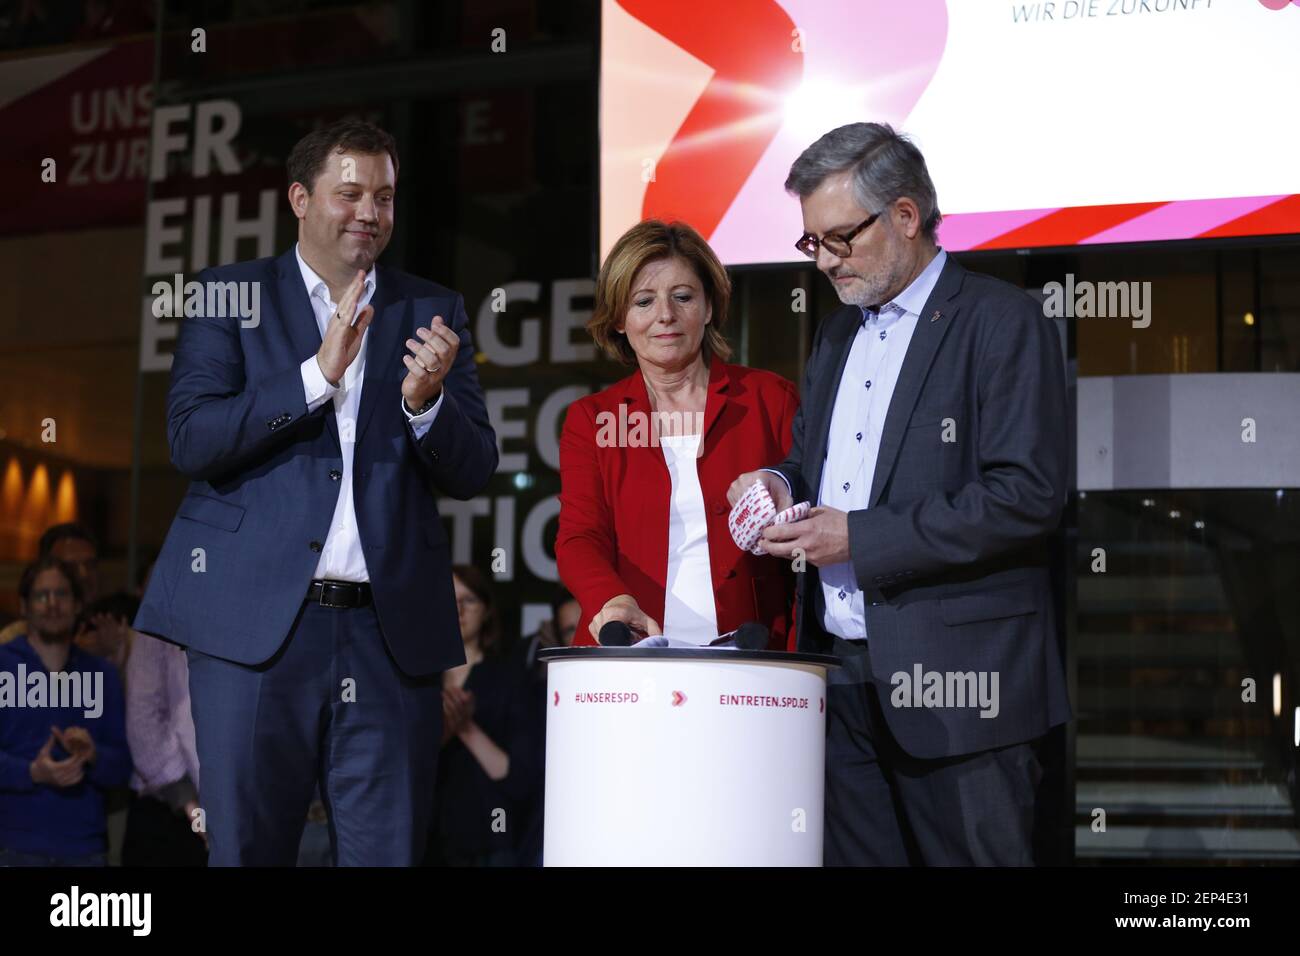 (10/26/2019) The SPD members elect Federal Finance Minister Olaf Scholz and Klara Geywitz just ahead of Norbert Walter-Borjans and Saskia Esken for the SPD presidency. The race for the SPD presidency goes into the runoff election in November: the two candidates will then be elected at the party congress. (Photo by Simone Kuhlmey/Pacific Press/Sipa USA) Stock Photo